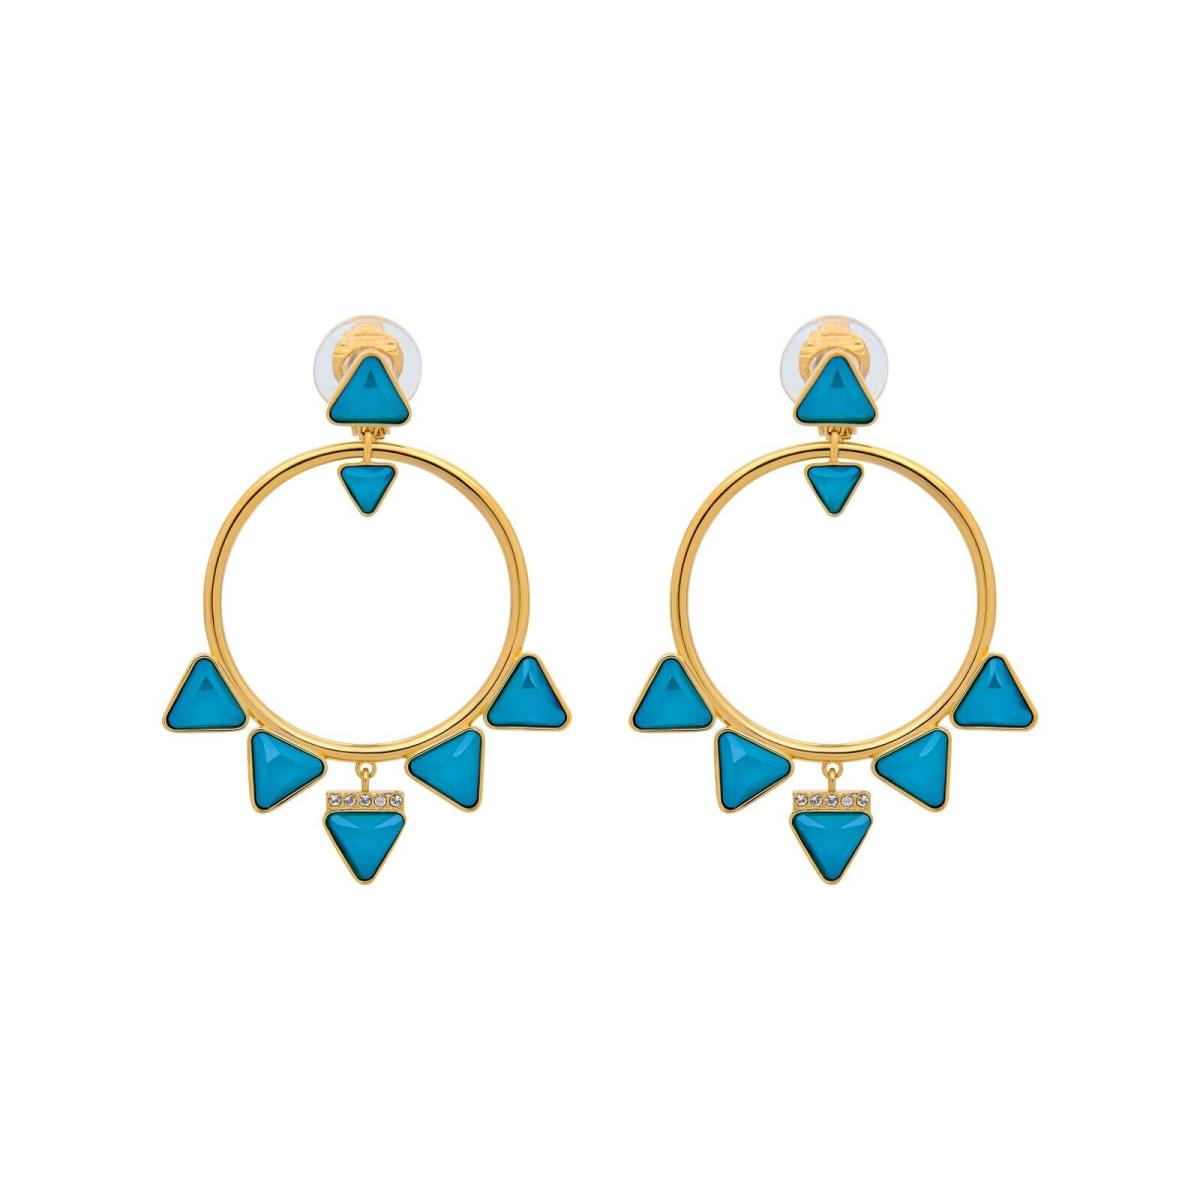 Swarovski Rose Gold Hoop Clip-on Earrings with Turquoise Crystals 5415711